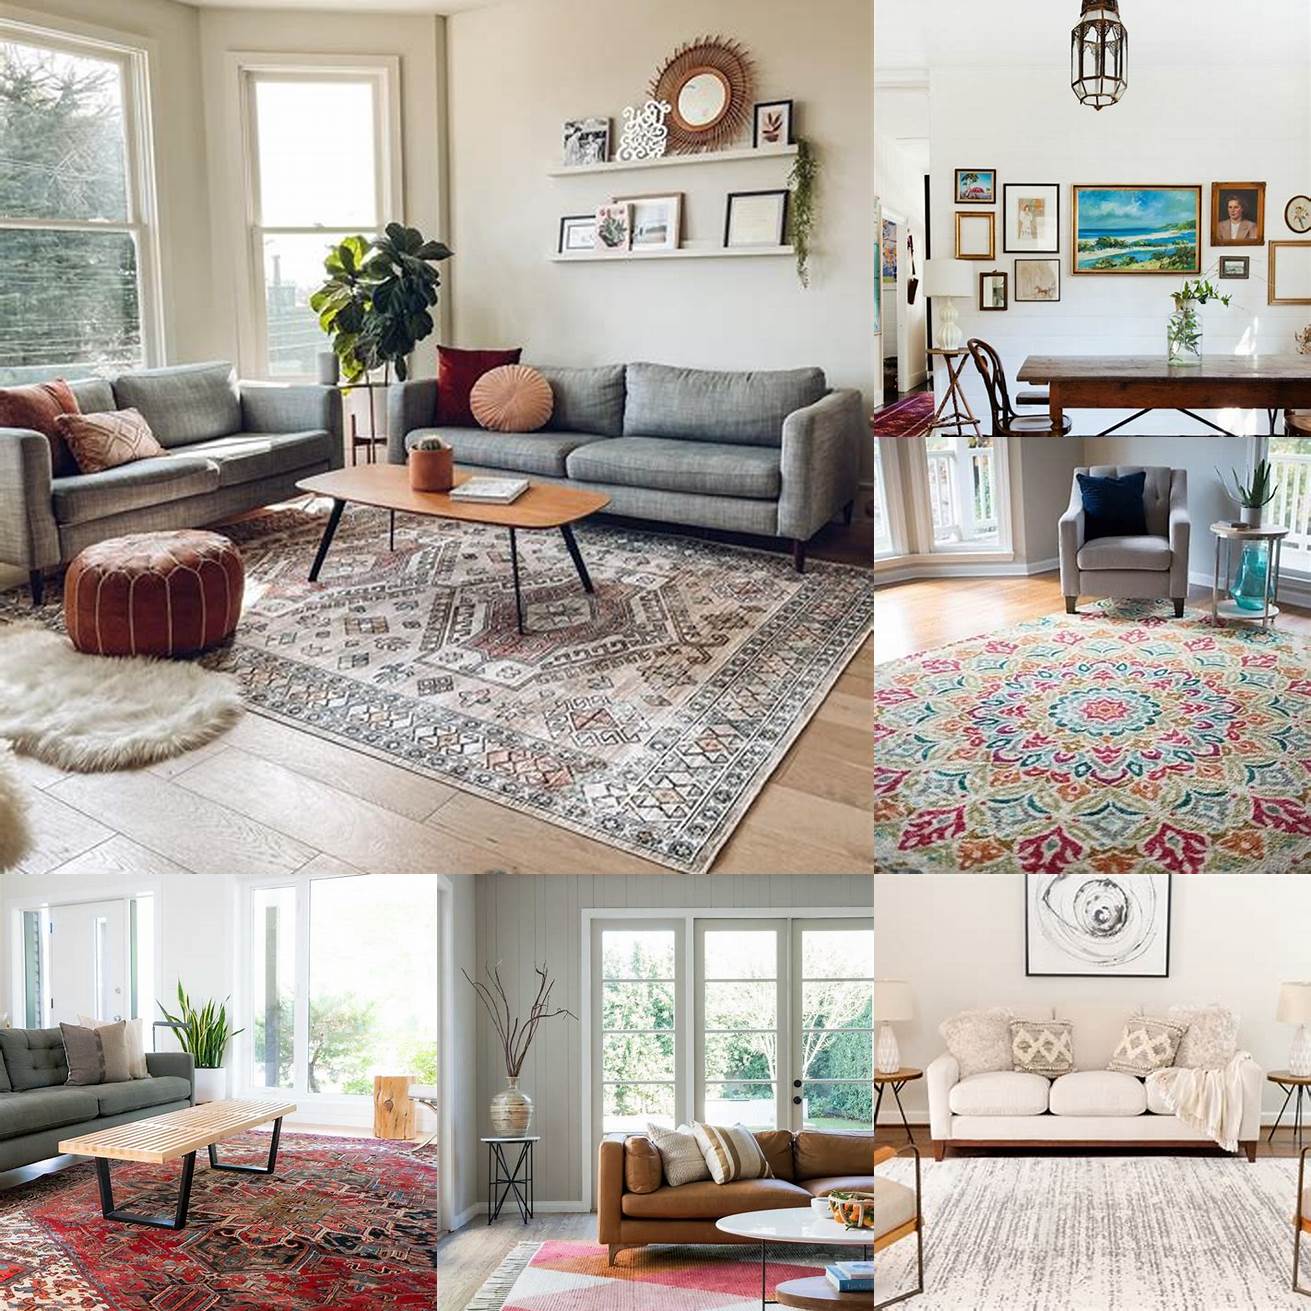 Use a bold area rug to anchor the space